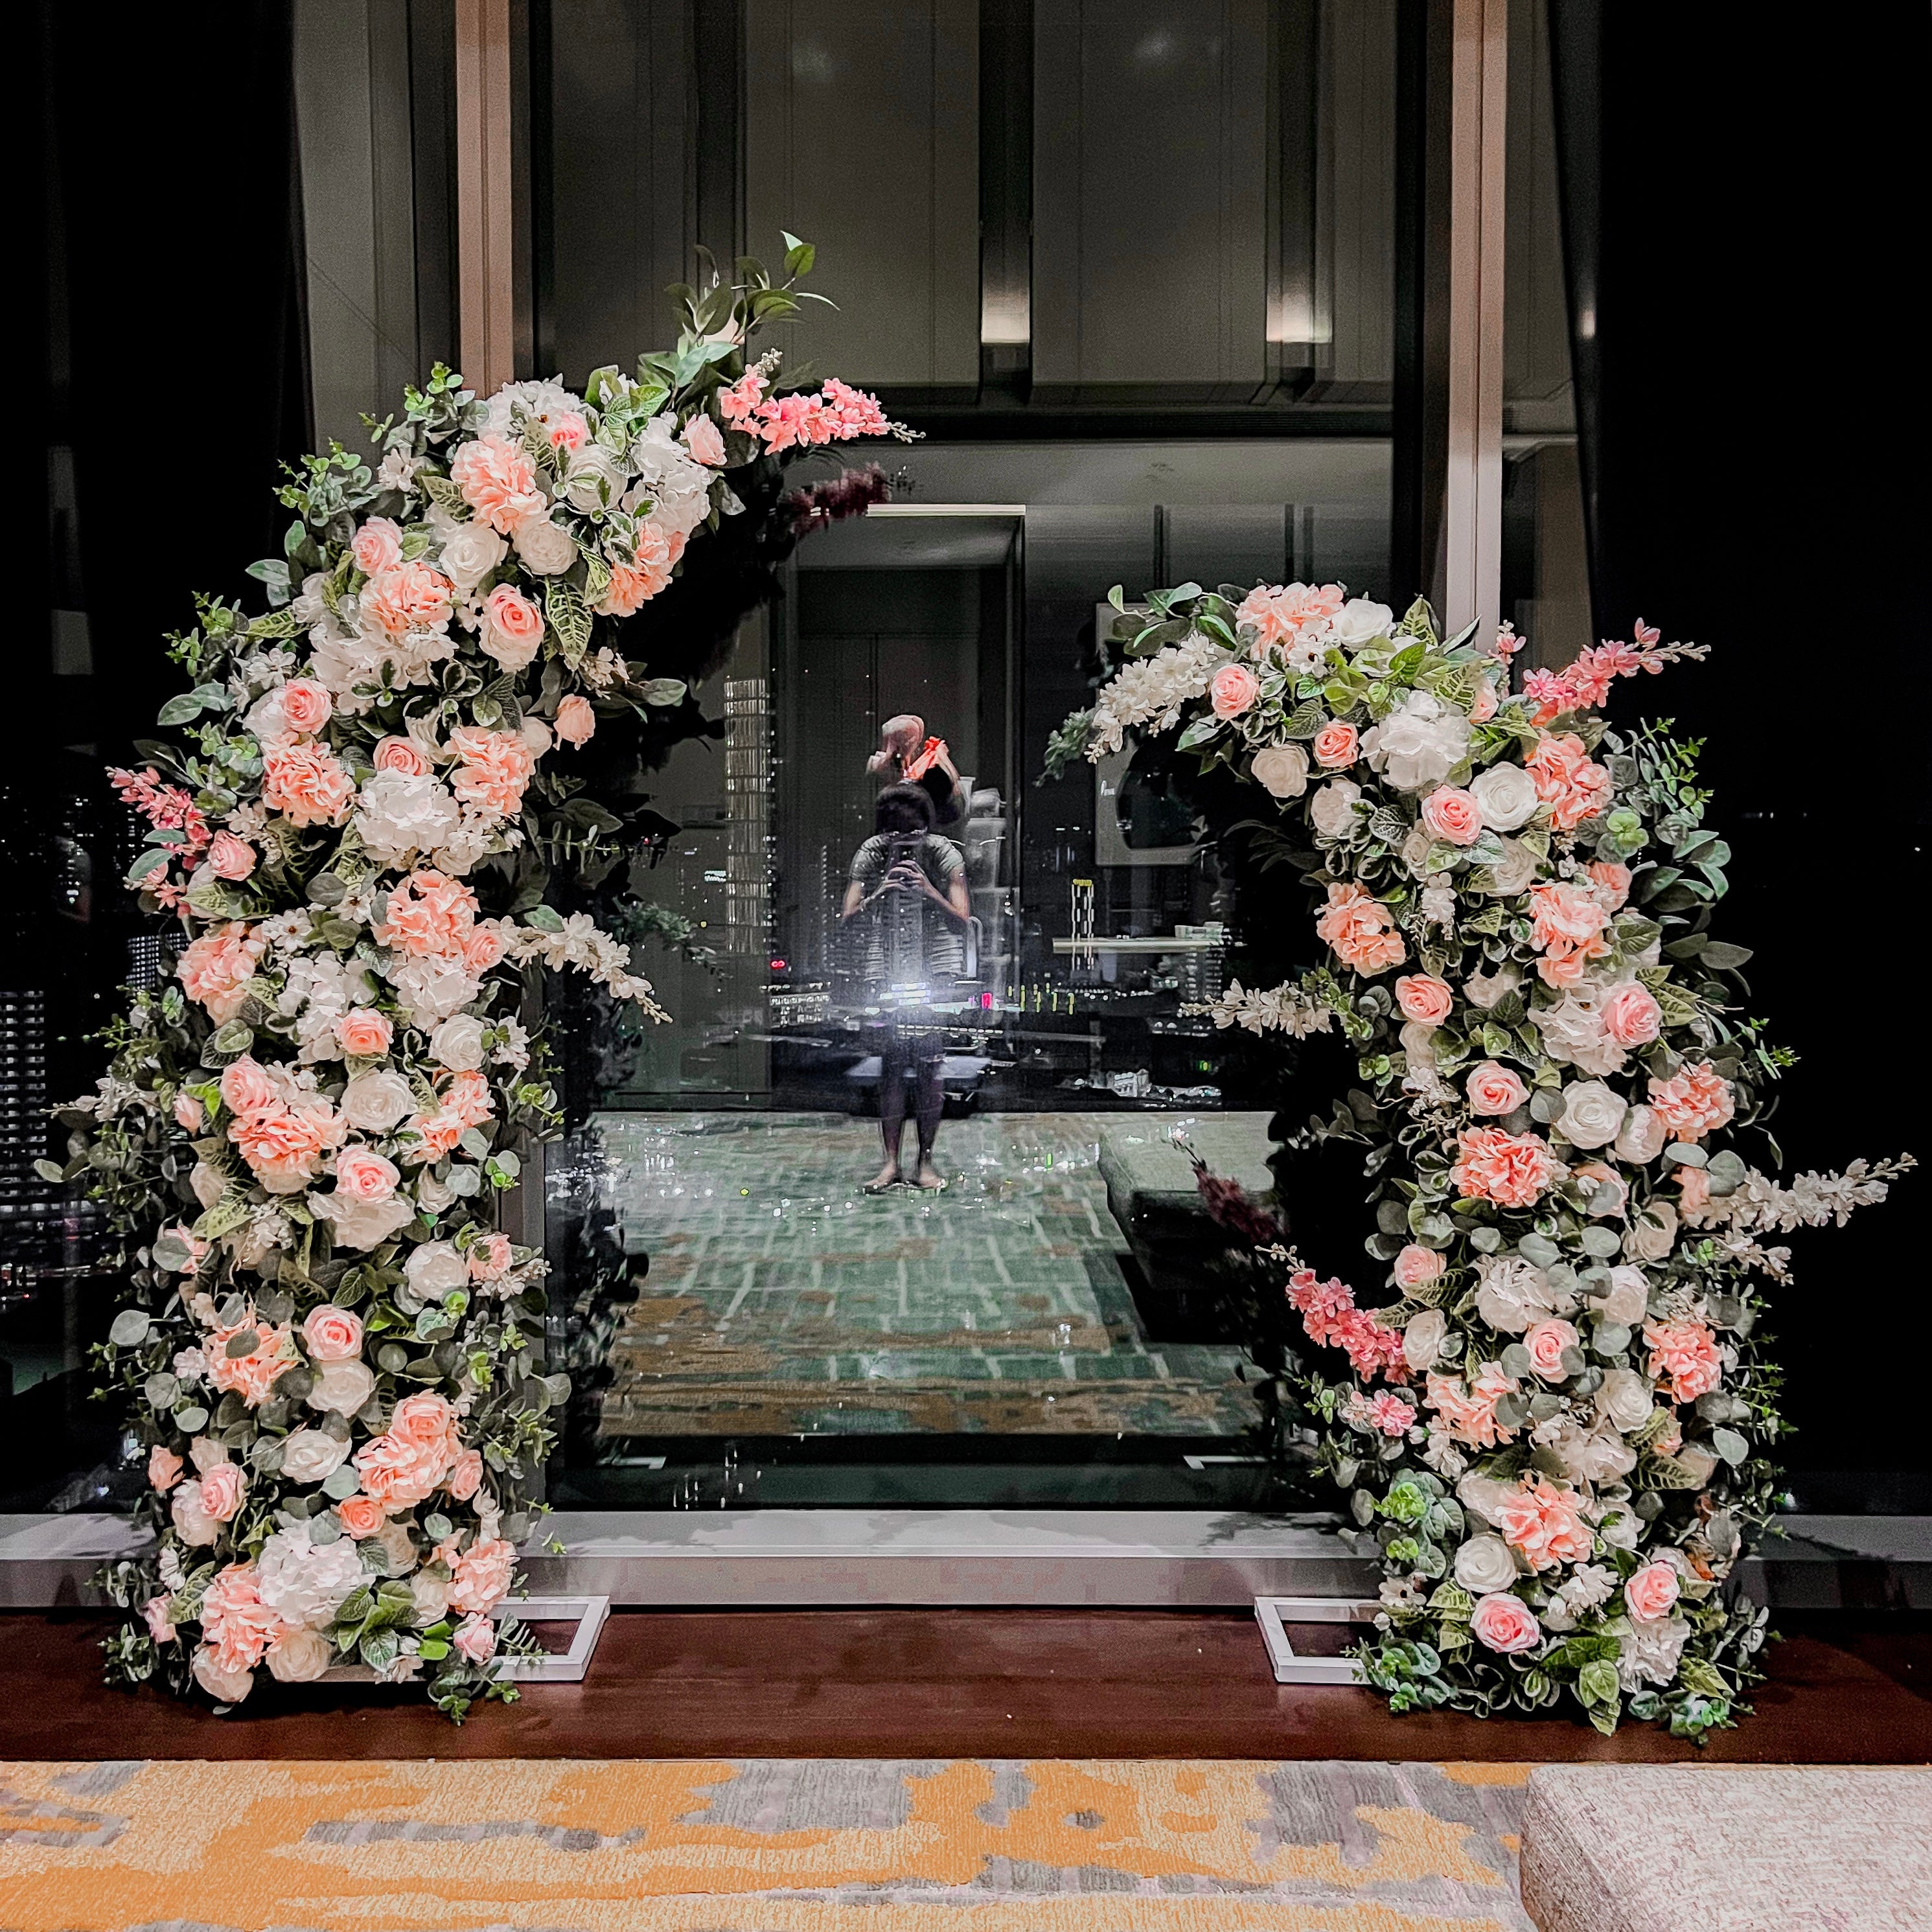 Wedding/ Solemnisation Decor in Singapore -Pink & White Deconstructed Floral Arch suitable for Indoor/Outdoor